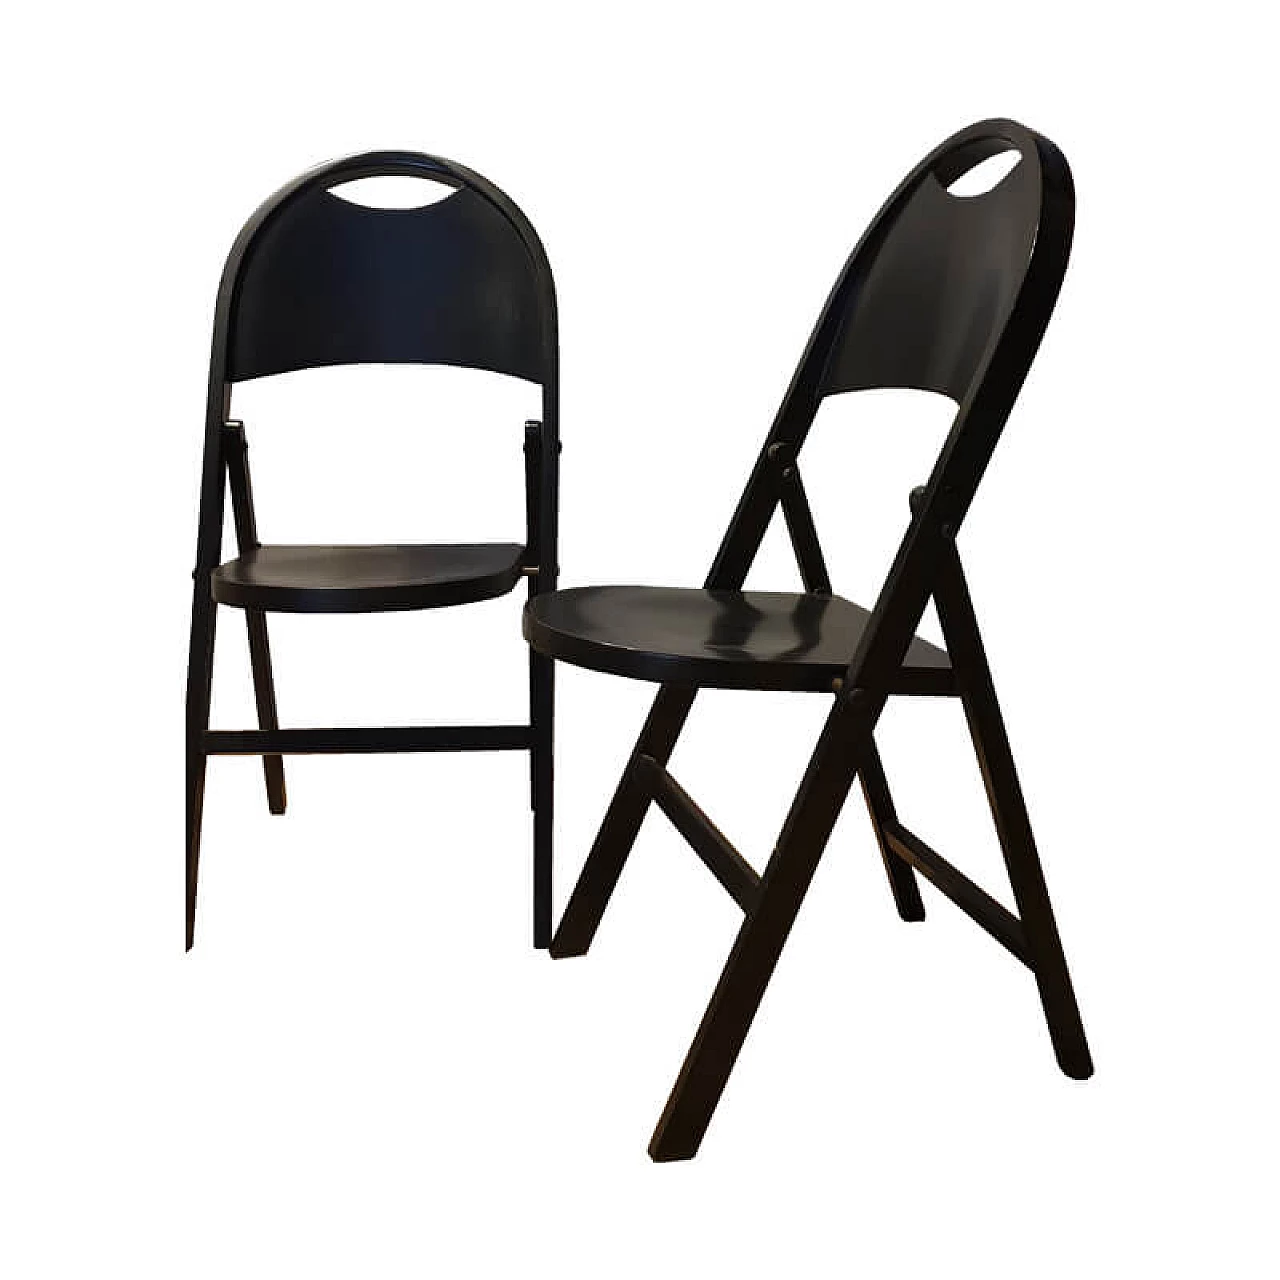 Pair of folding chairs "Tric", by Achille and Pier Giacomo Castiglioni, '60s 1072947